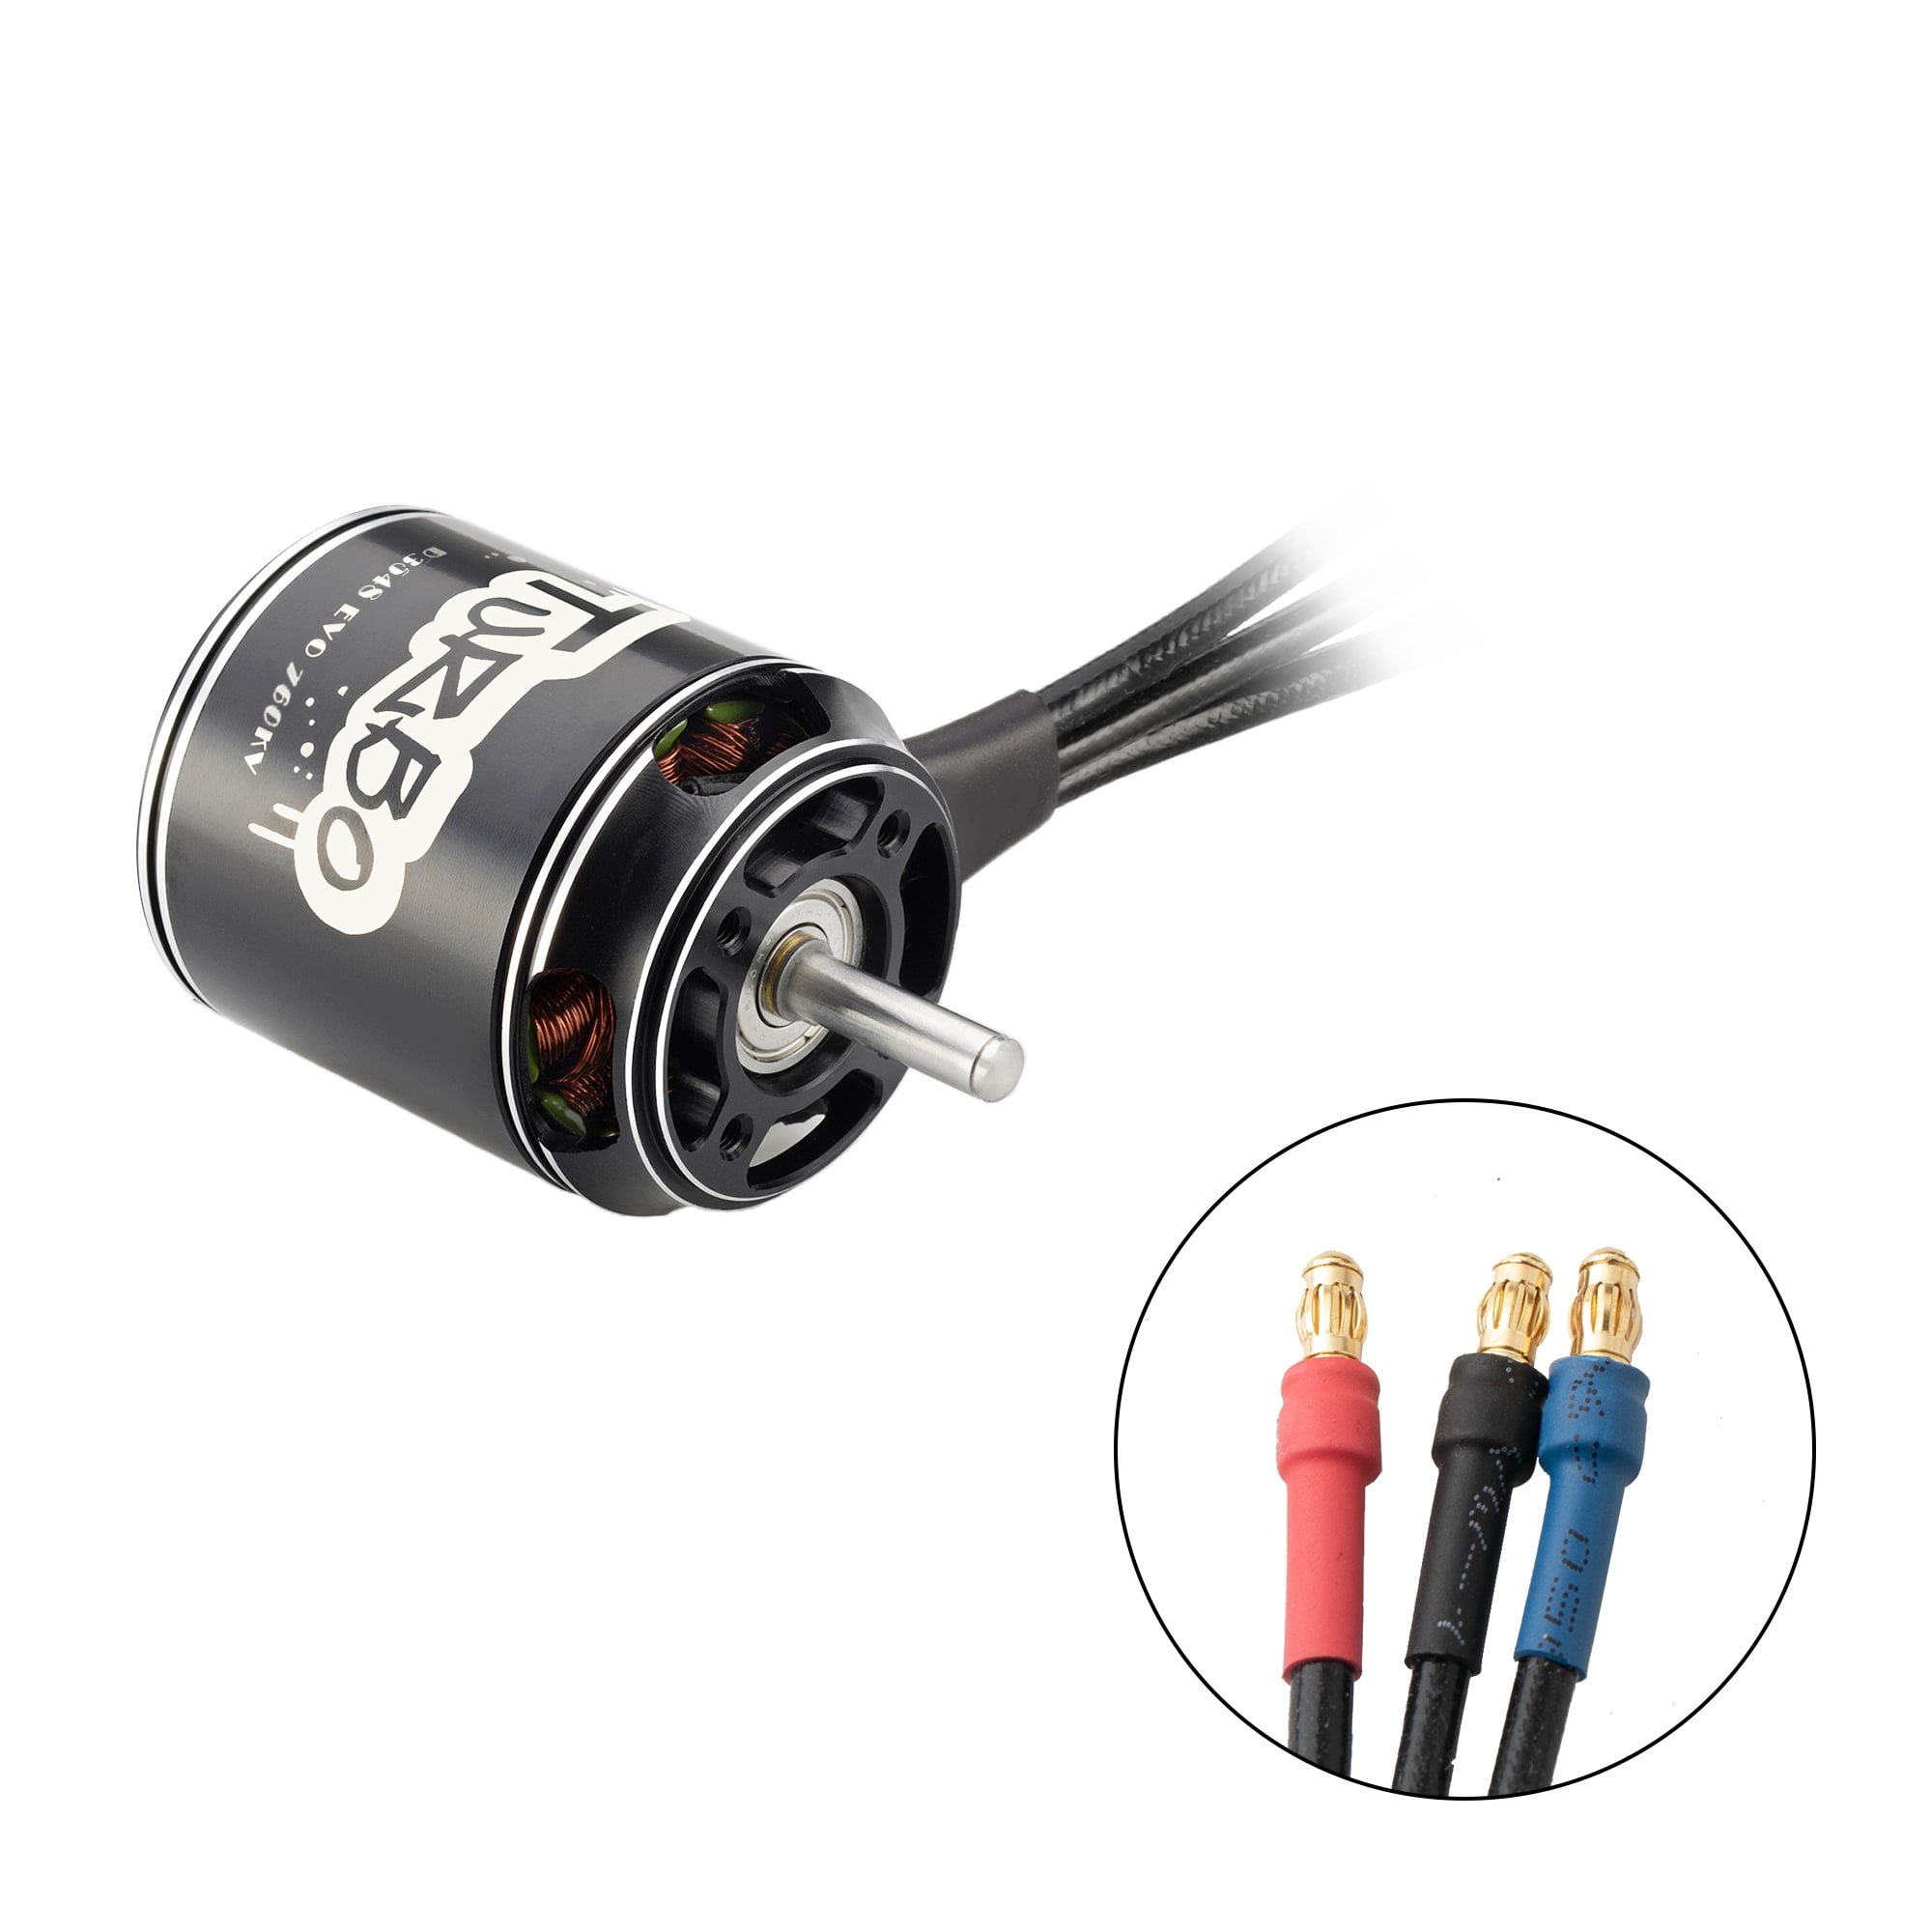 WinmetEuro Brushless Motor Silver D2826 Brushless Motor for RC Airplane for Rc Fixed‑wing Airplane for Drone for RC